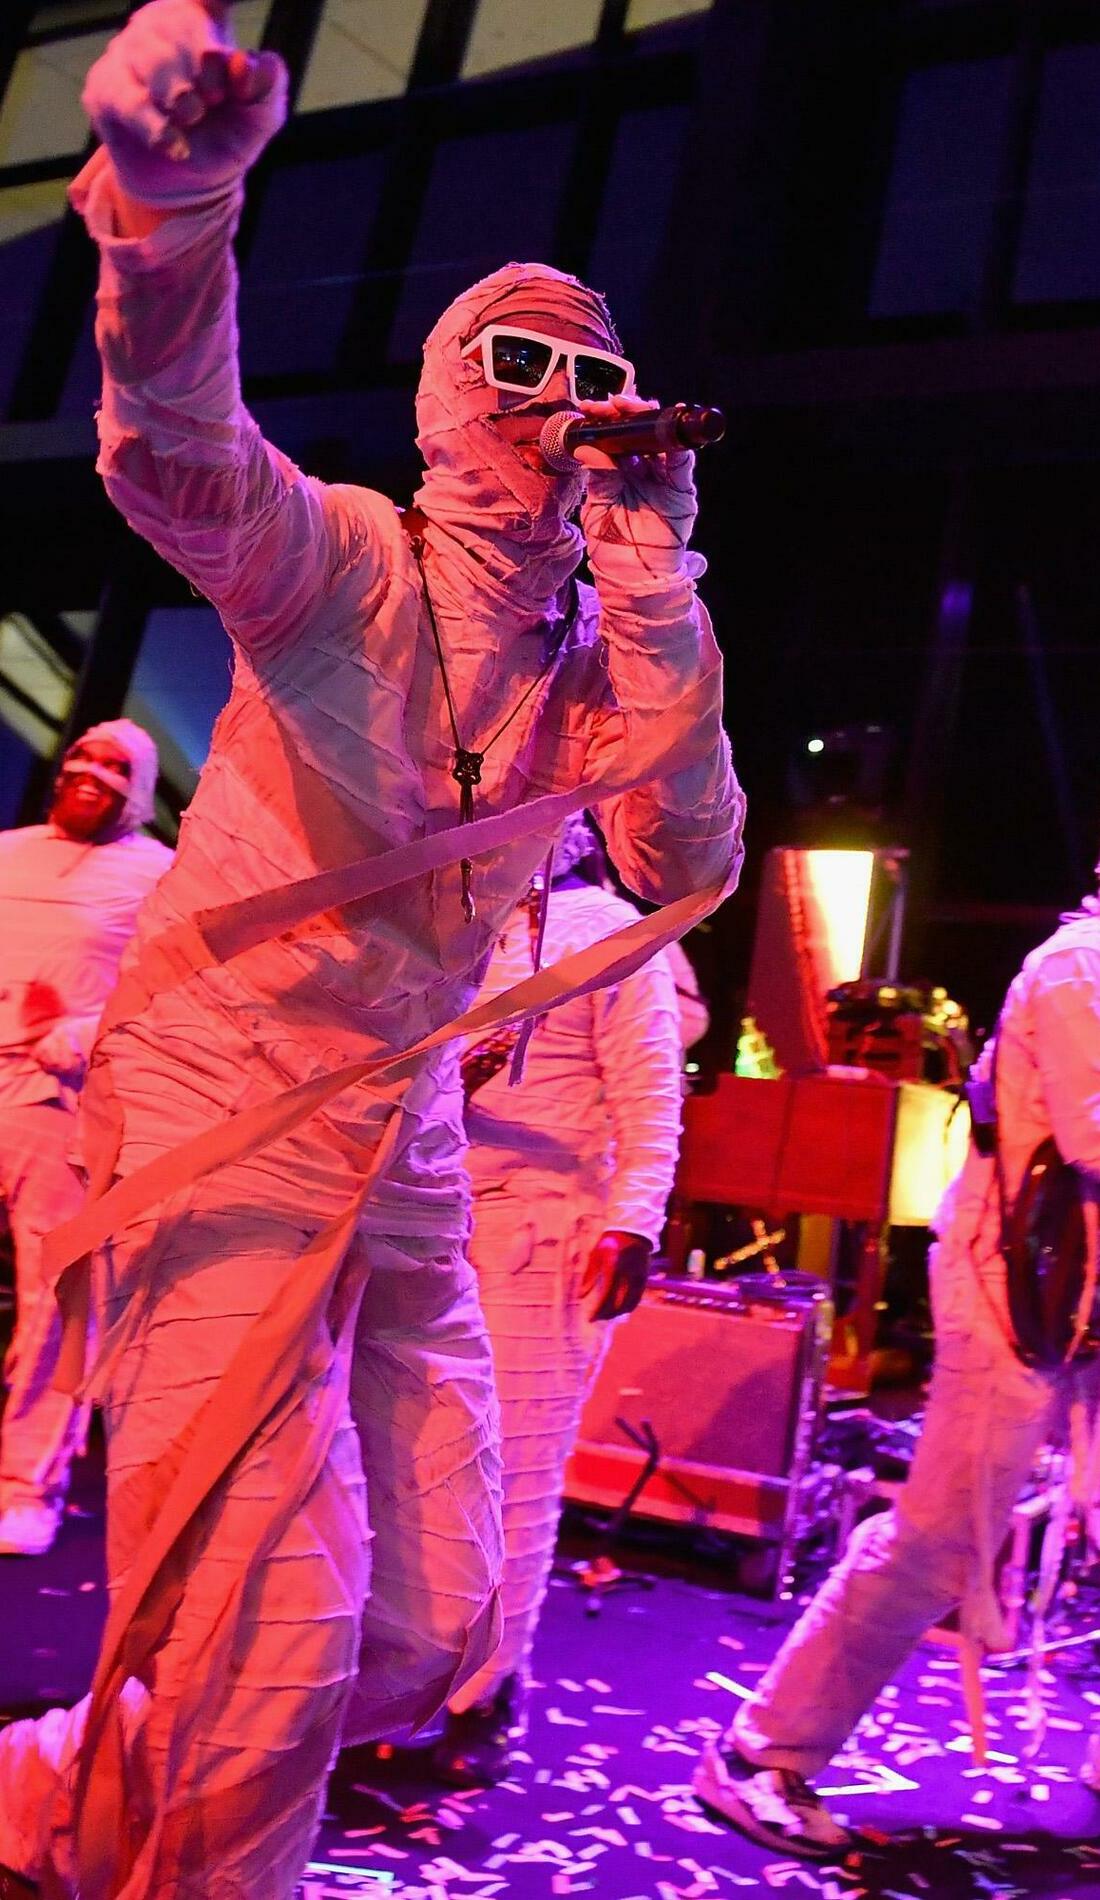 A Here Come The Mummies live event